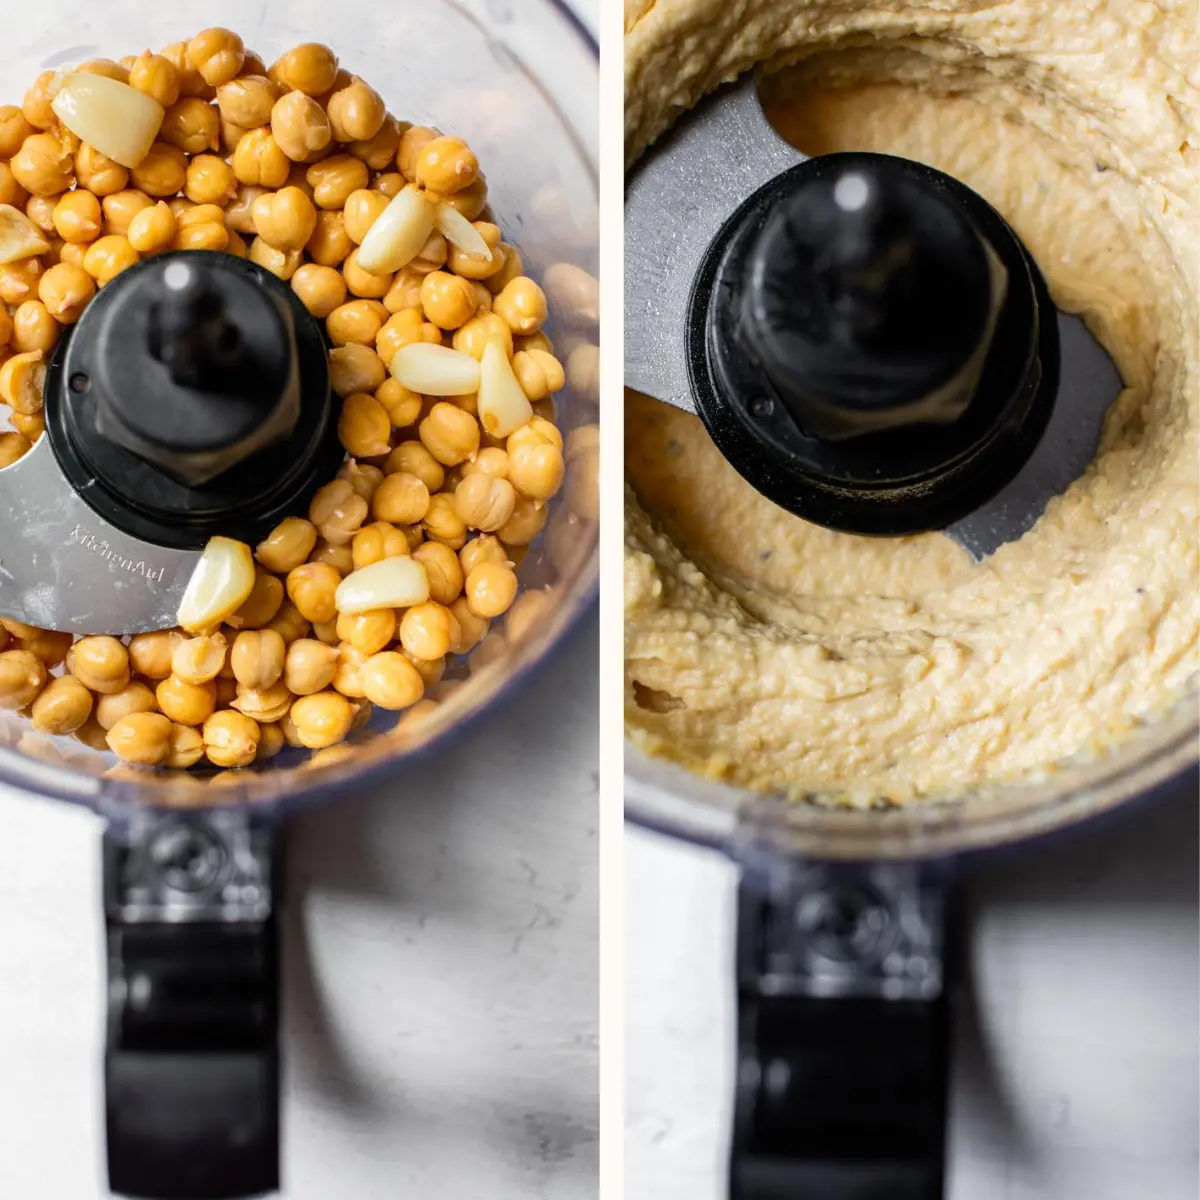 chickpeas and hummus in a food processor